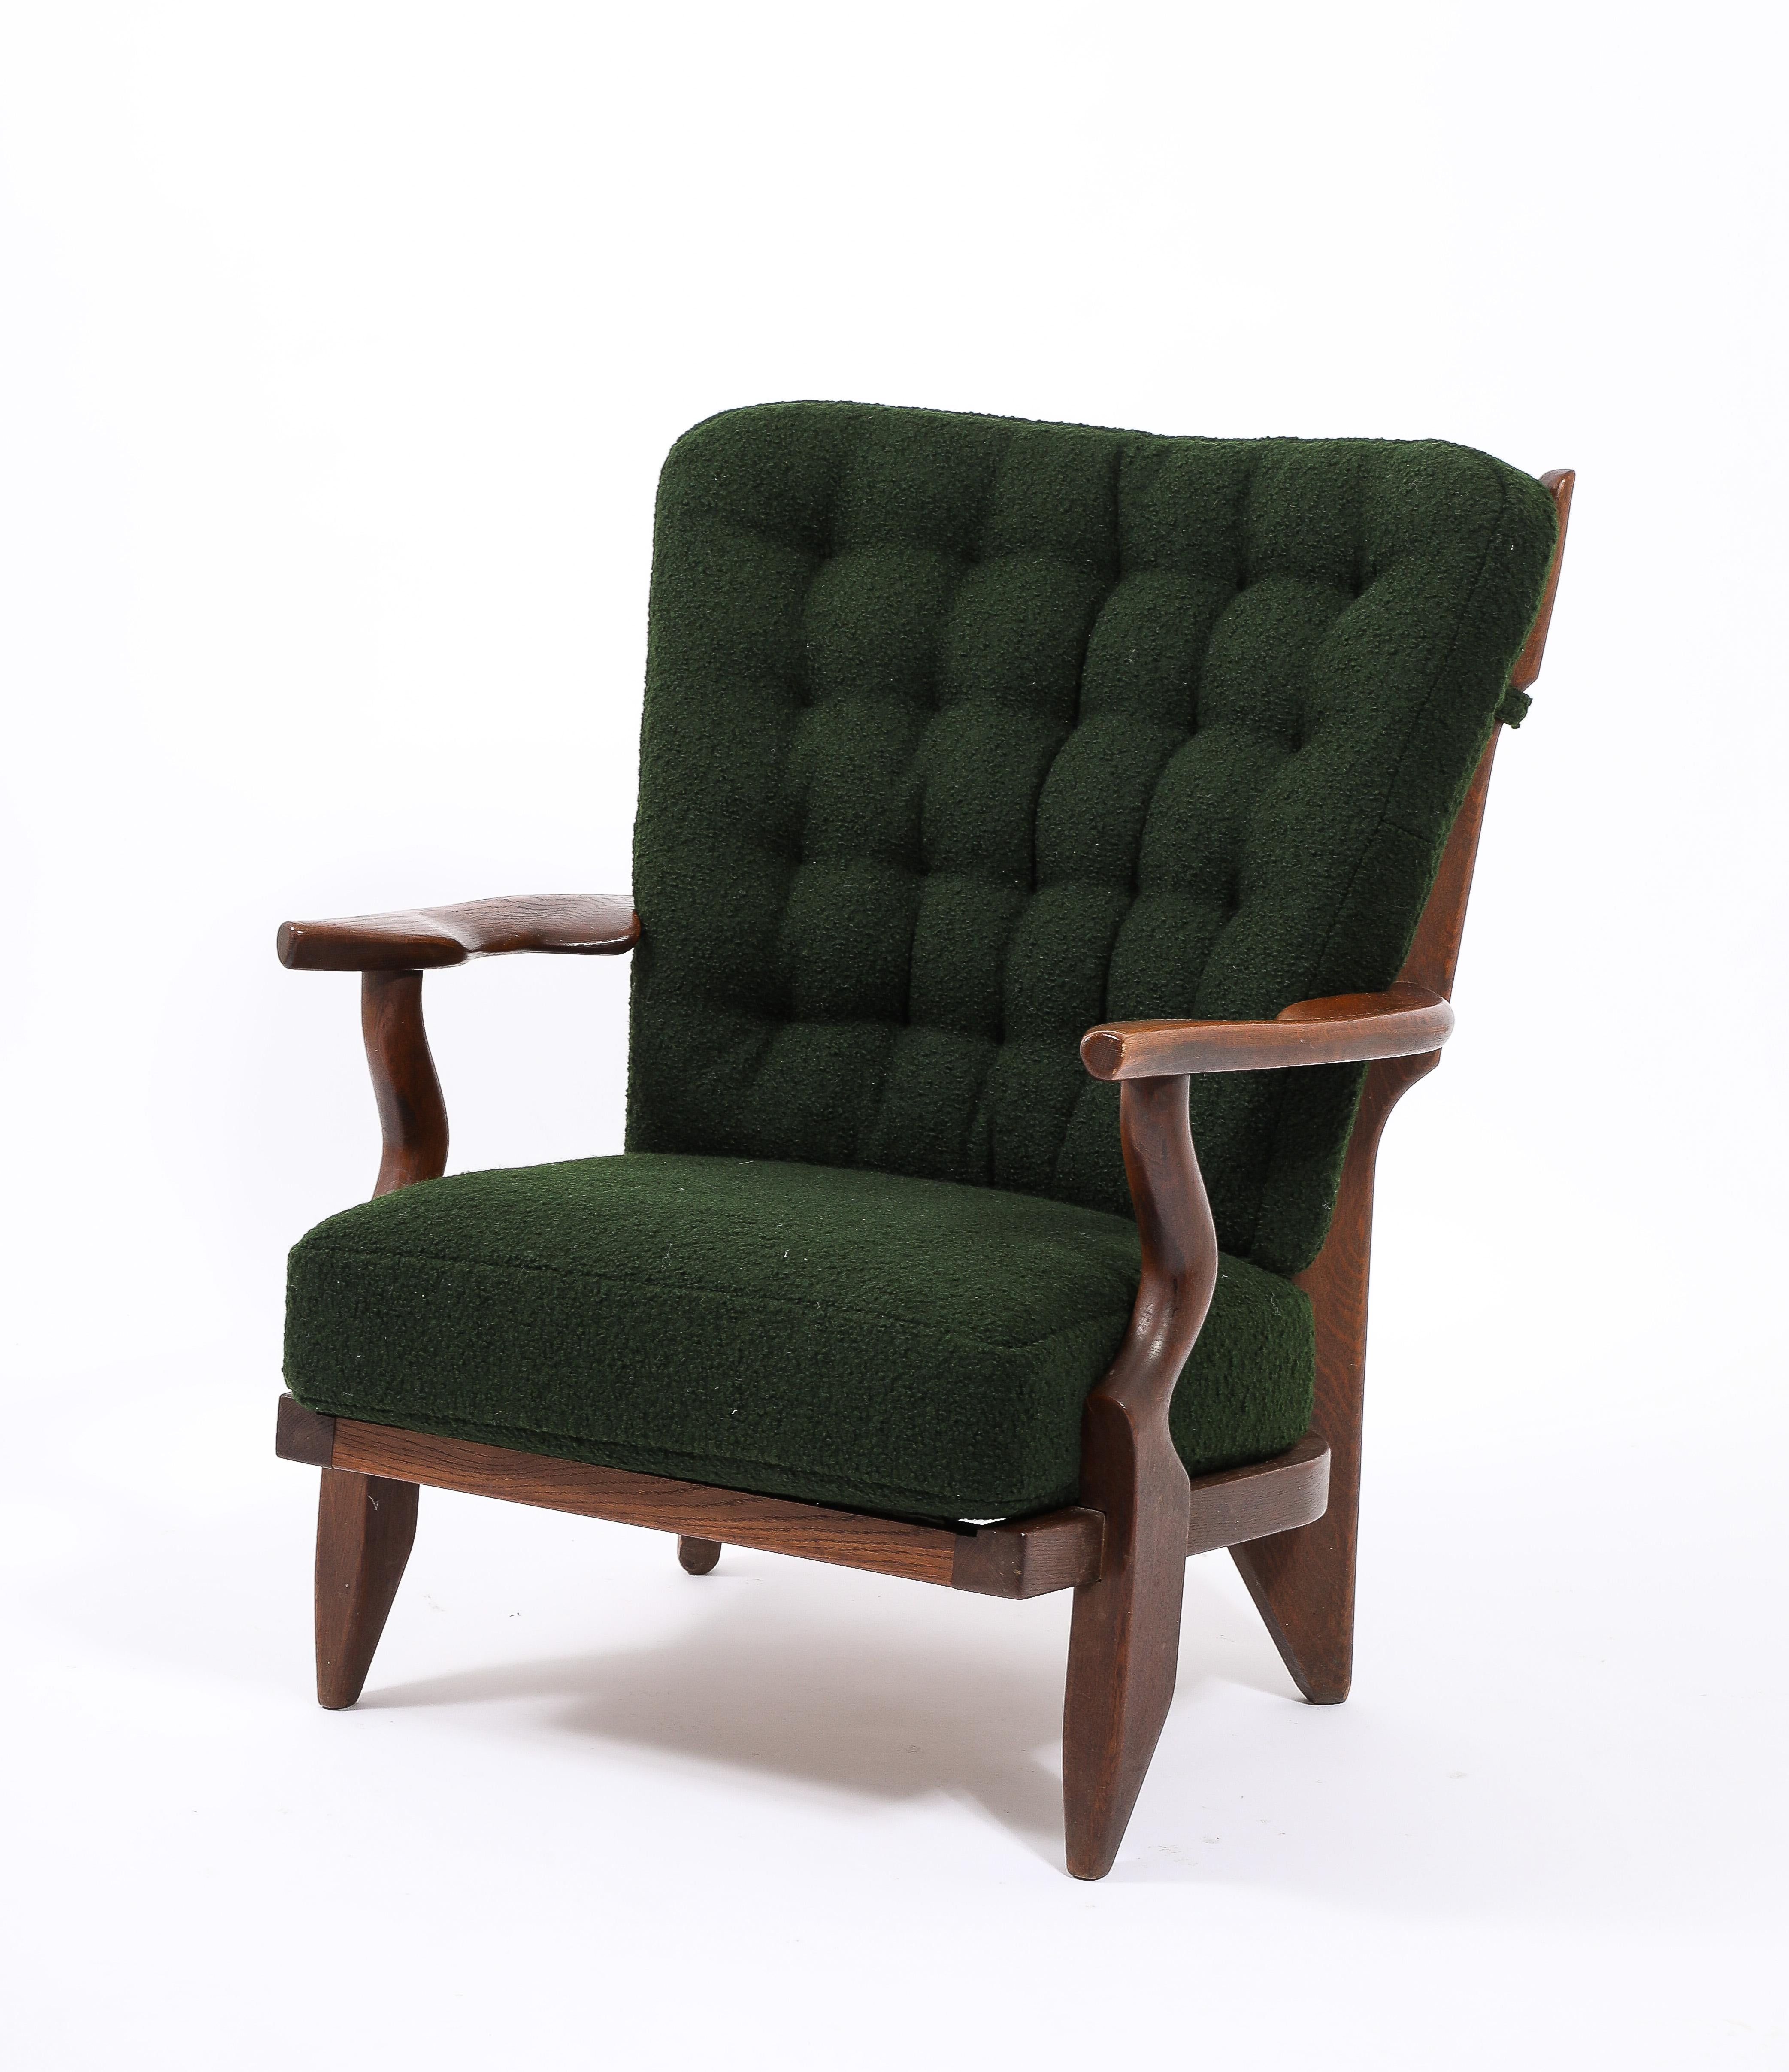 Guillerme & Chambron Petit Repos Armchair in Green Bouclé, France 1950's For Sale 4